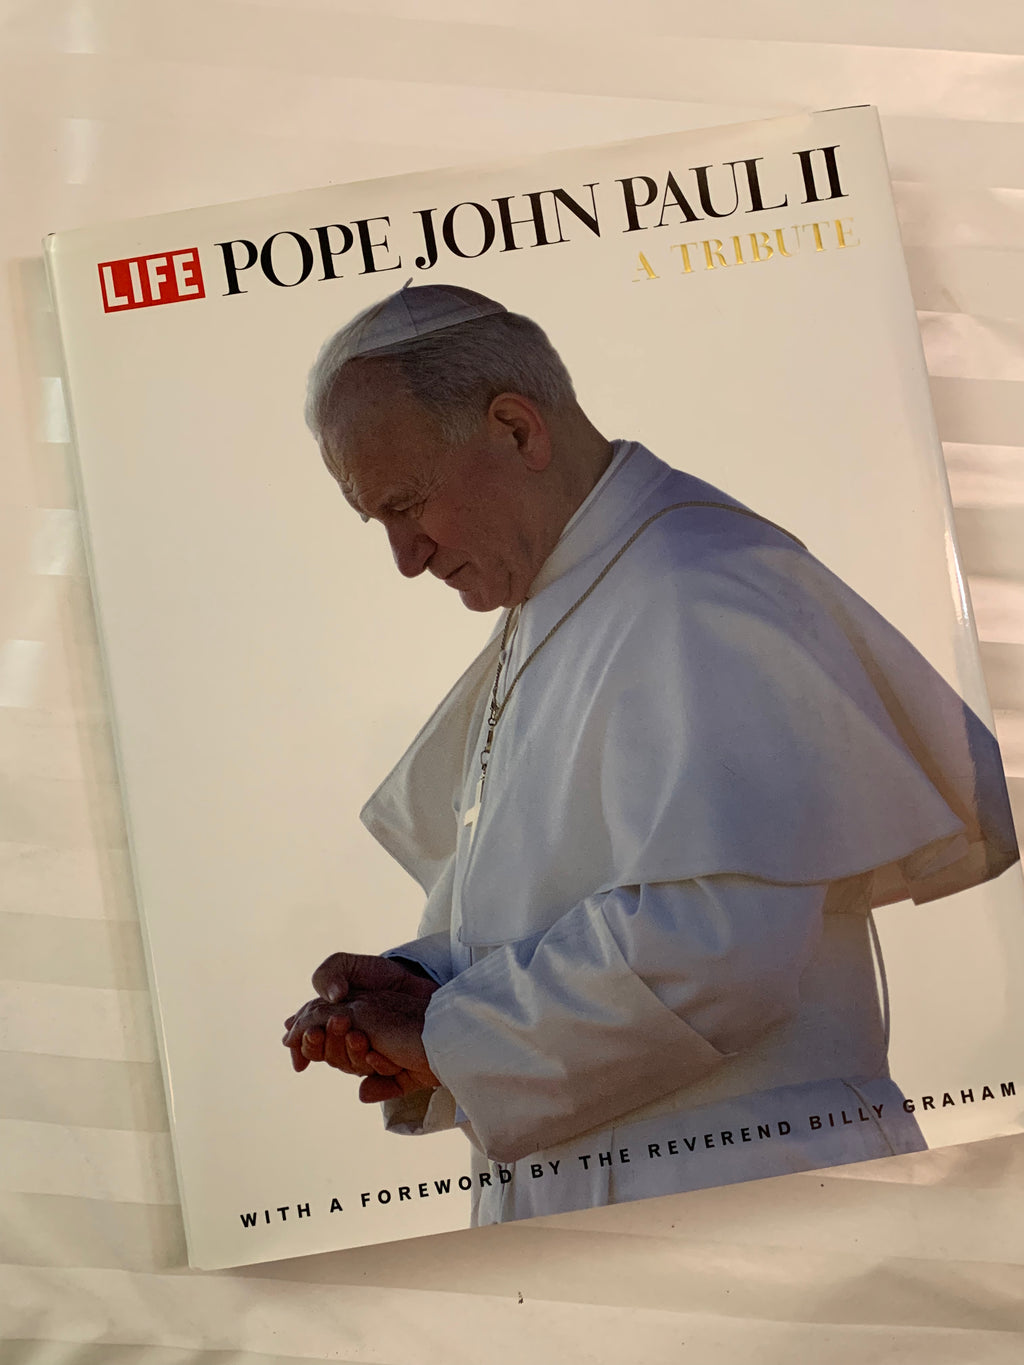 Pope John Paul: A Tribute- By LIFE